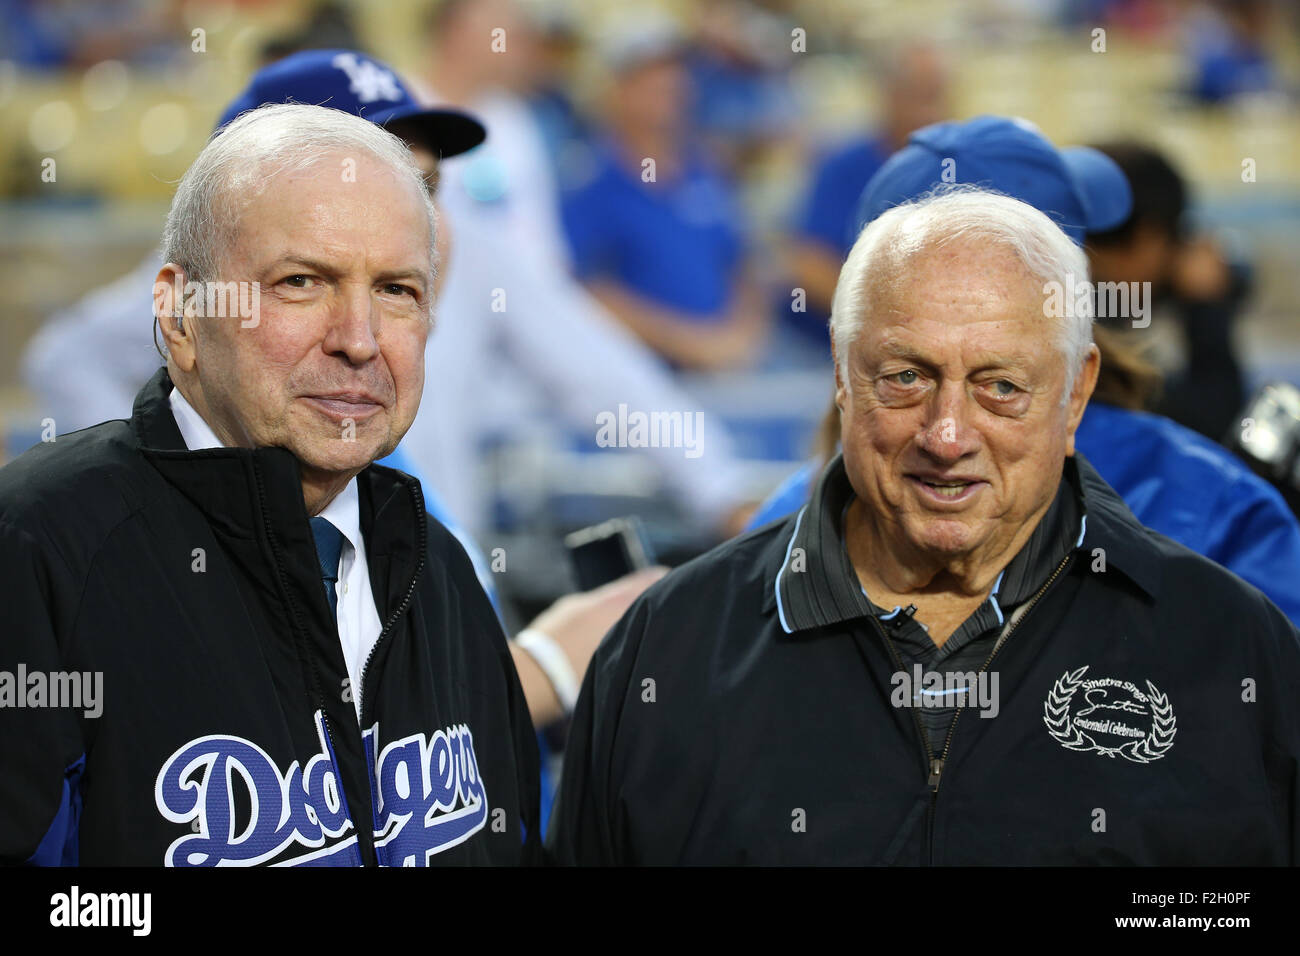 Los Angeles, CA, USA. 18th Sep, 2015. Frank Sinatra Jr. and Tommy Lasorda  chat before Frank Sinatra Night at Dodger Stadium in the game between the  Pittsburg Pirates and the Los Angeles